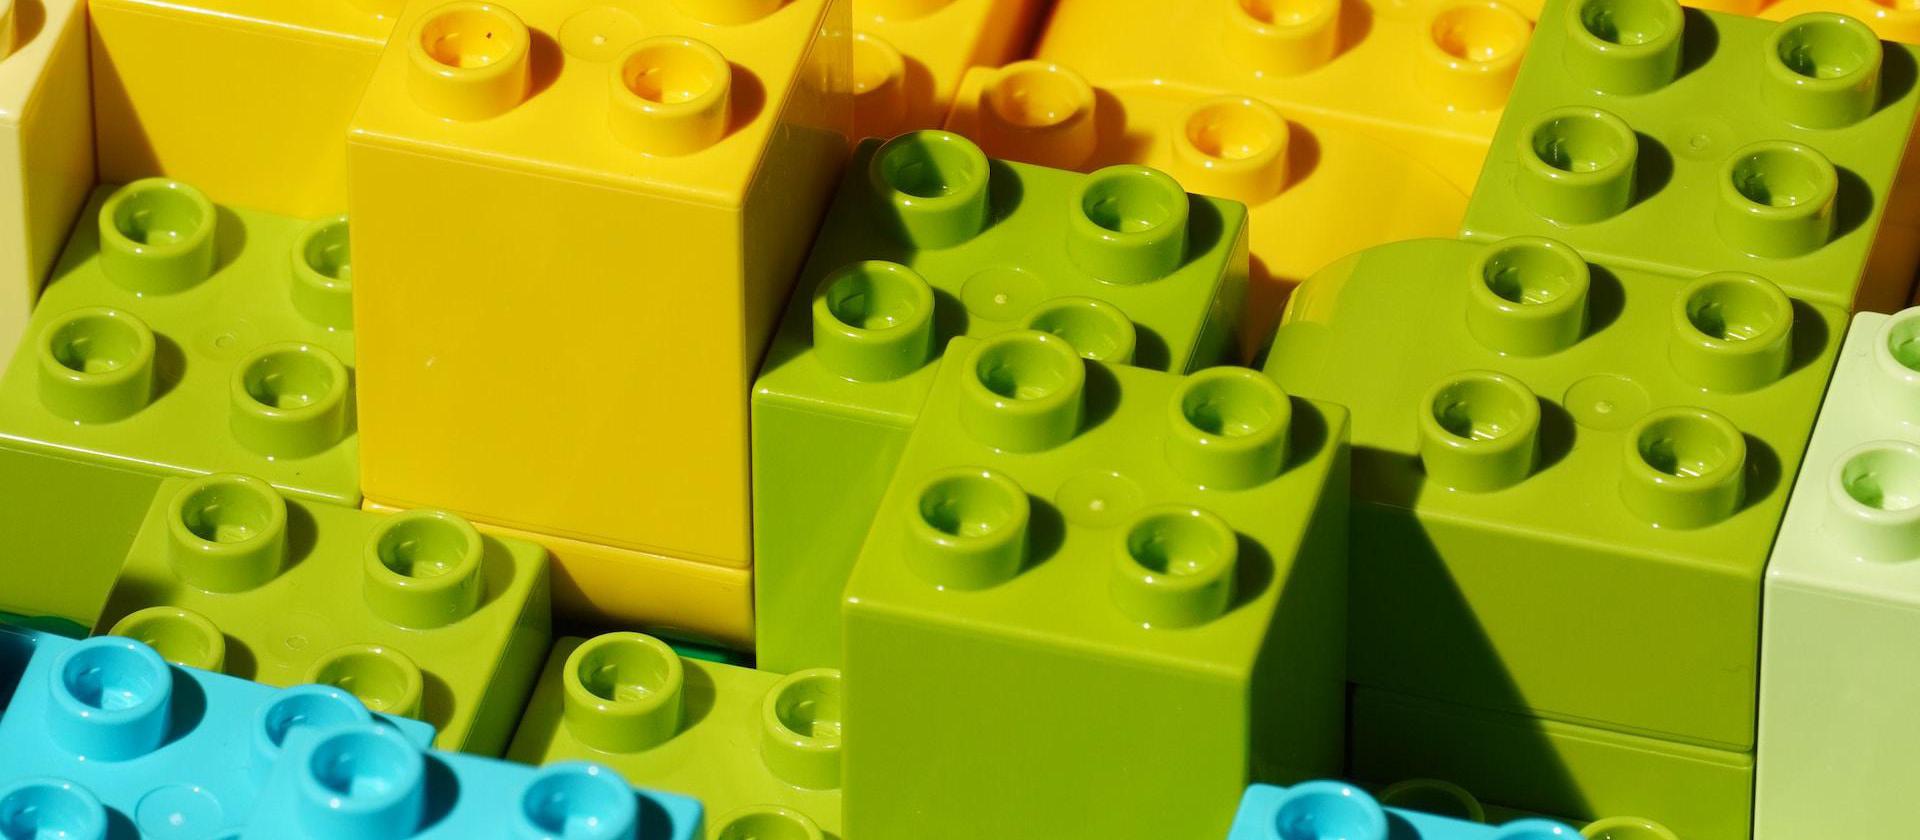 a close up of many different colored legos.